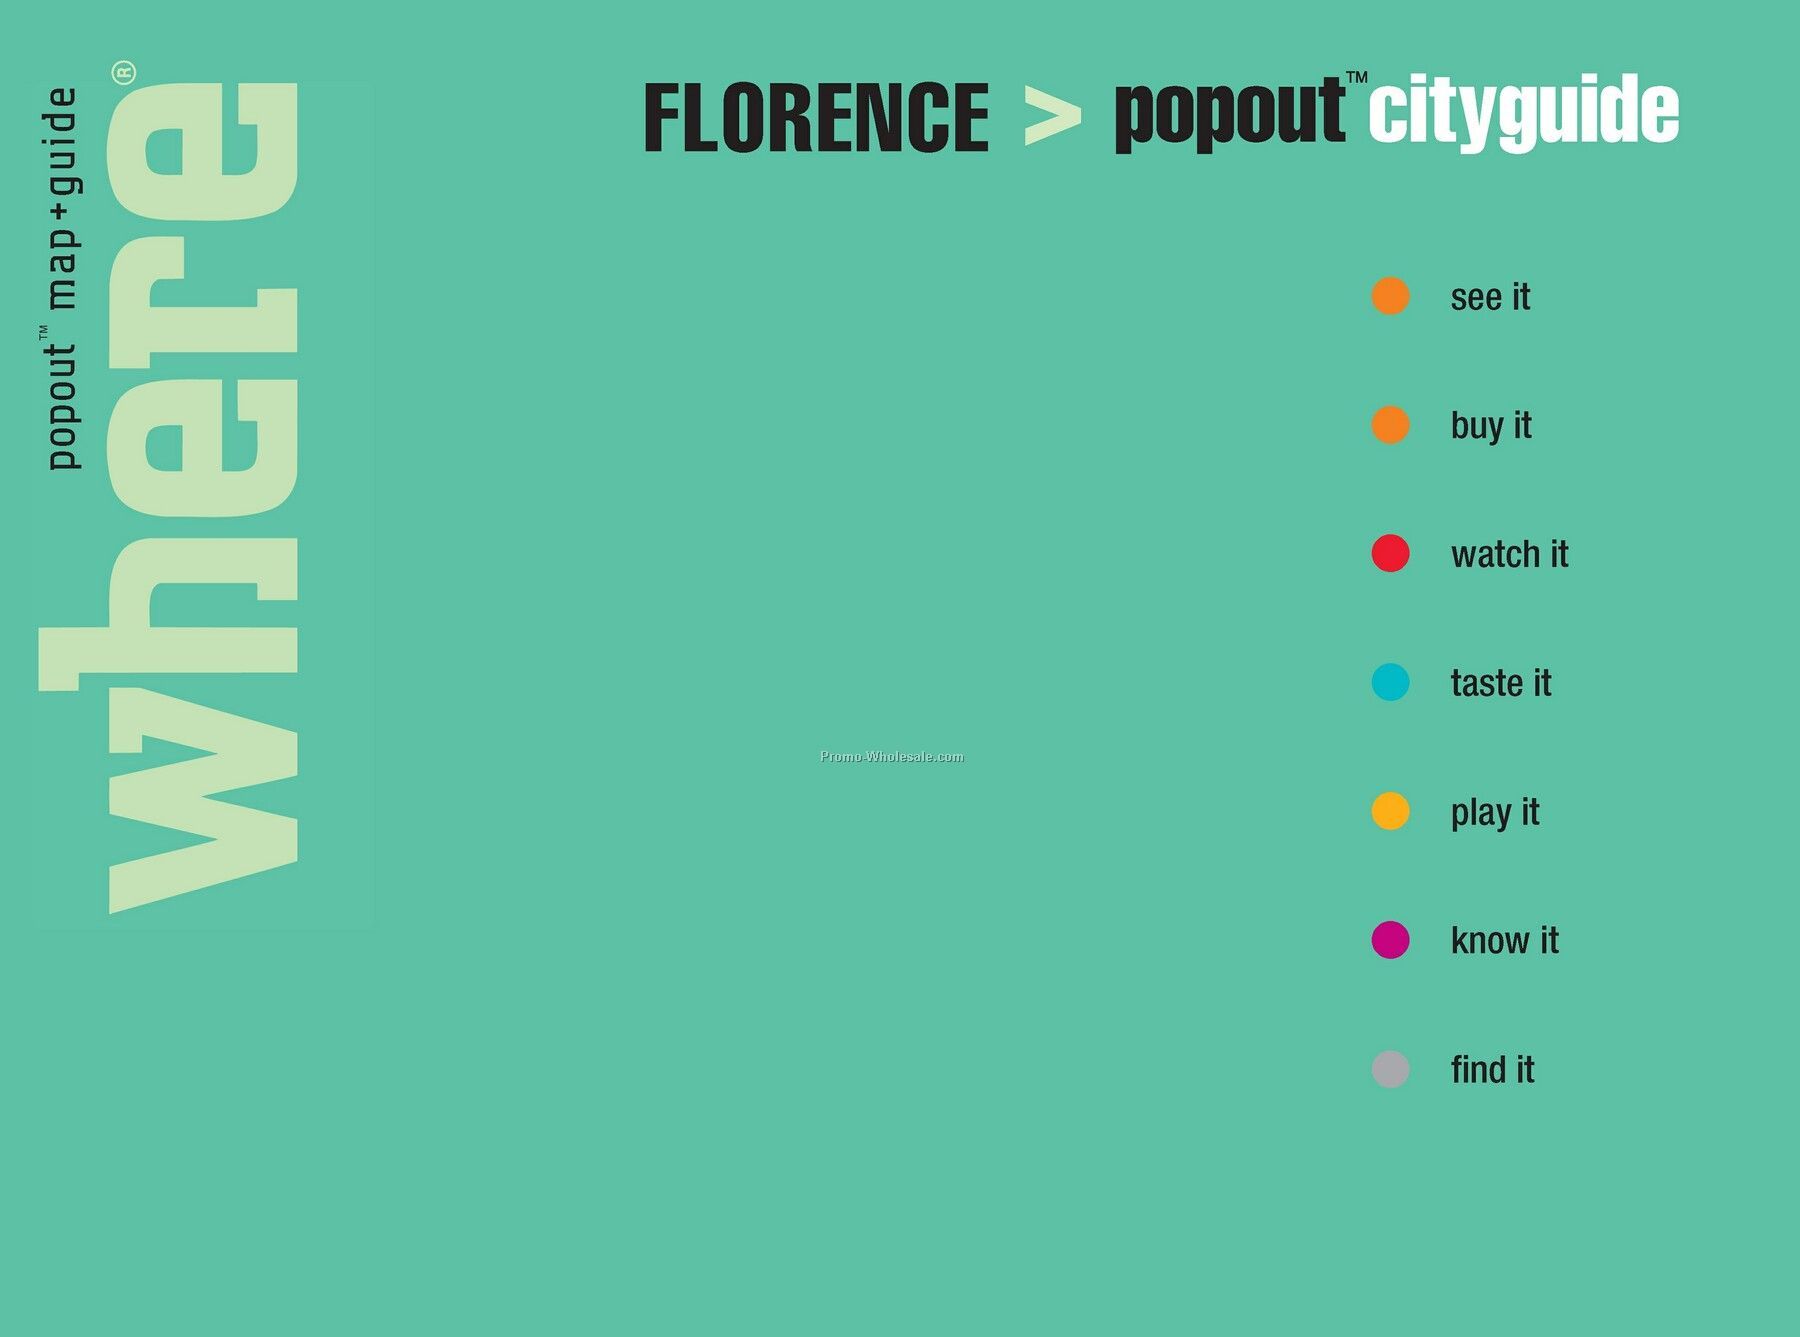 Restaurant Guides - Featuring Popout Maps - City Guide Florence